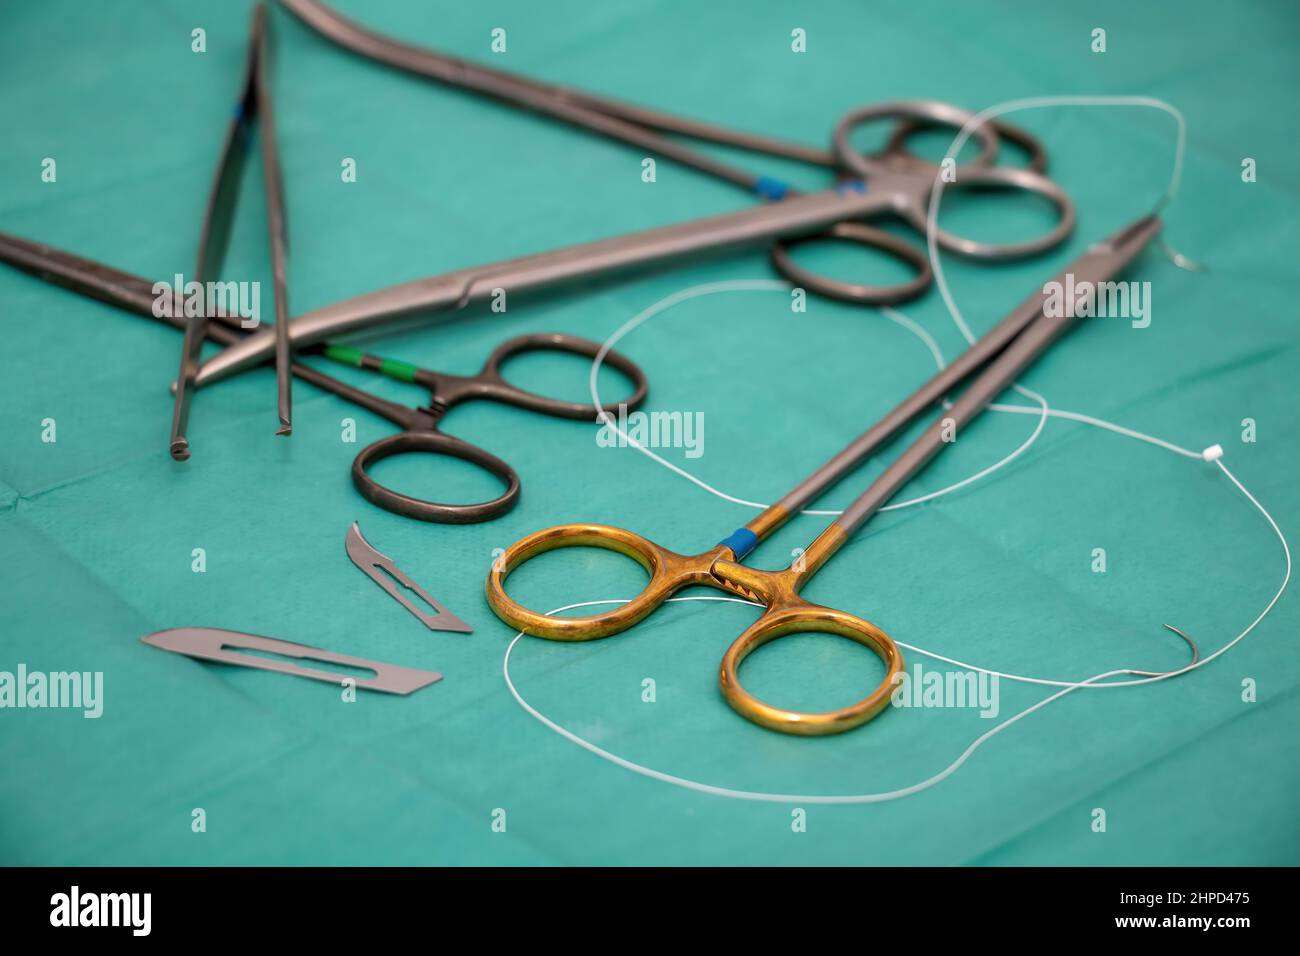 Sterilized surgical instrument on green fabric background. Surgeon doctor stainless steel tool, forceps, needle holder or driver, scissor, blade, sutu Stock Photo